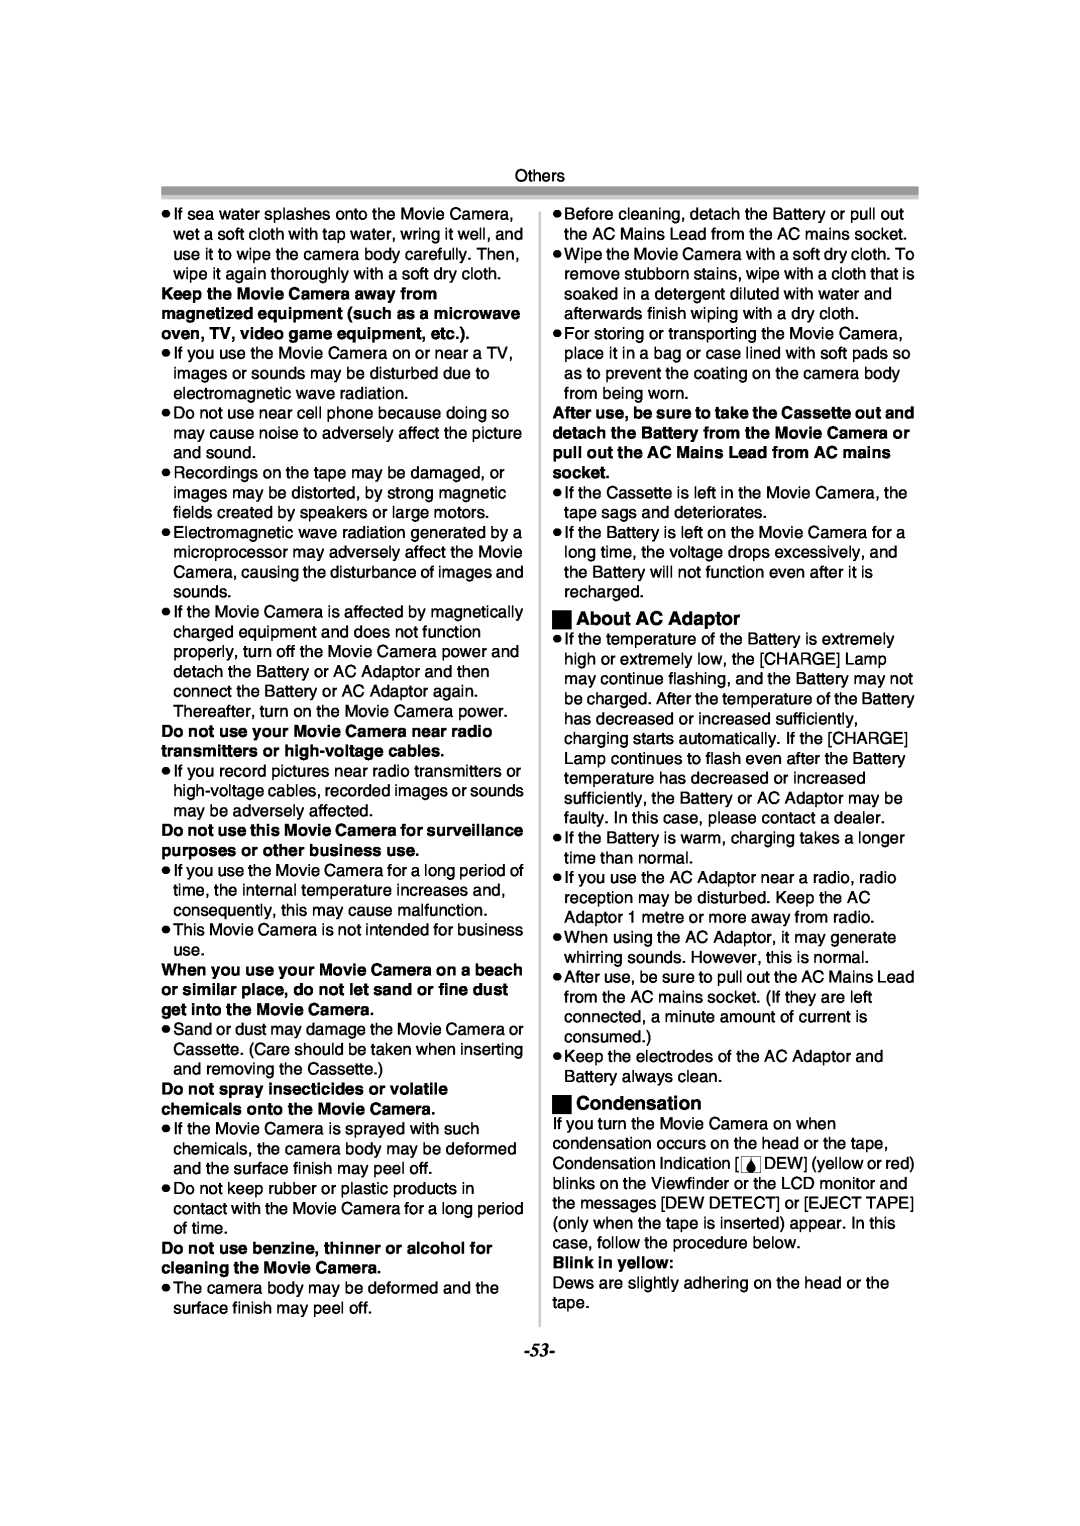 Panasonic NV-GS11GN, NV-GS15GN operating instructions ª About AC Adaptor, ª Condensation, Blink in yellow 